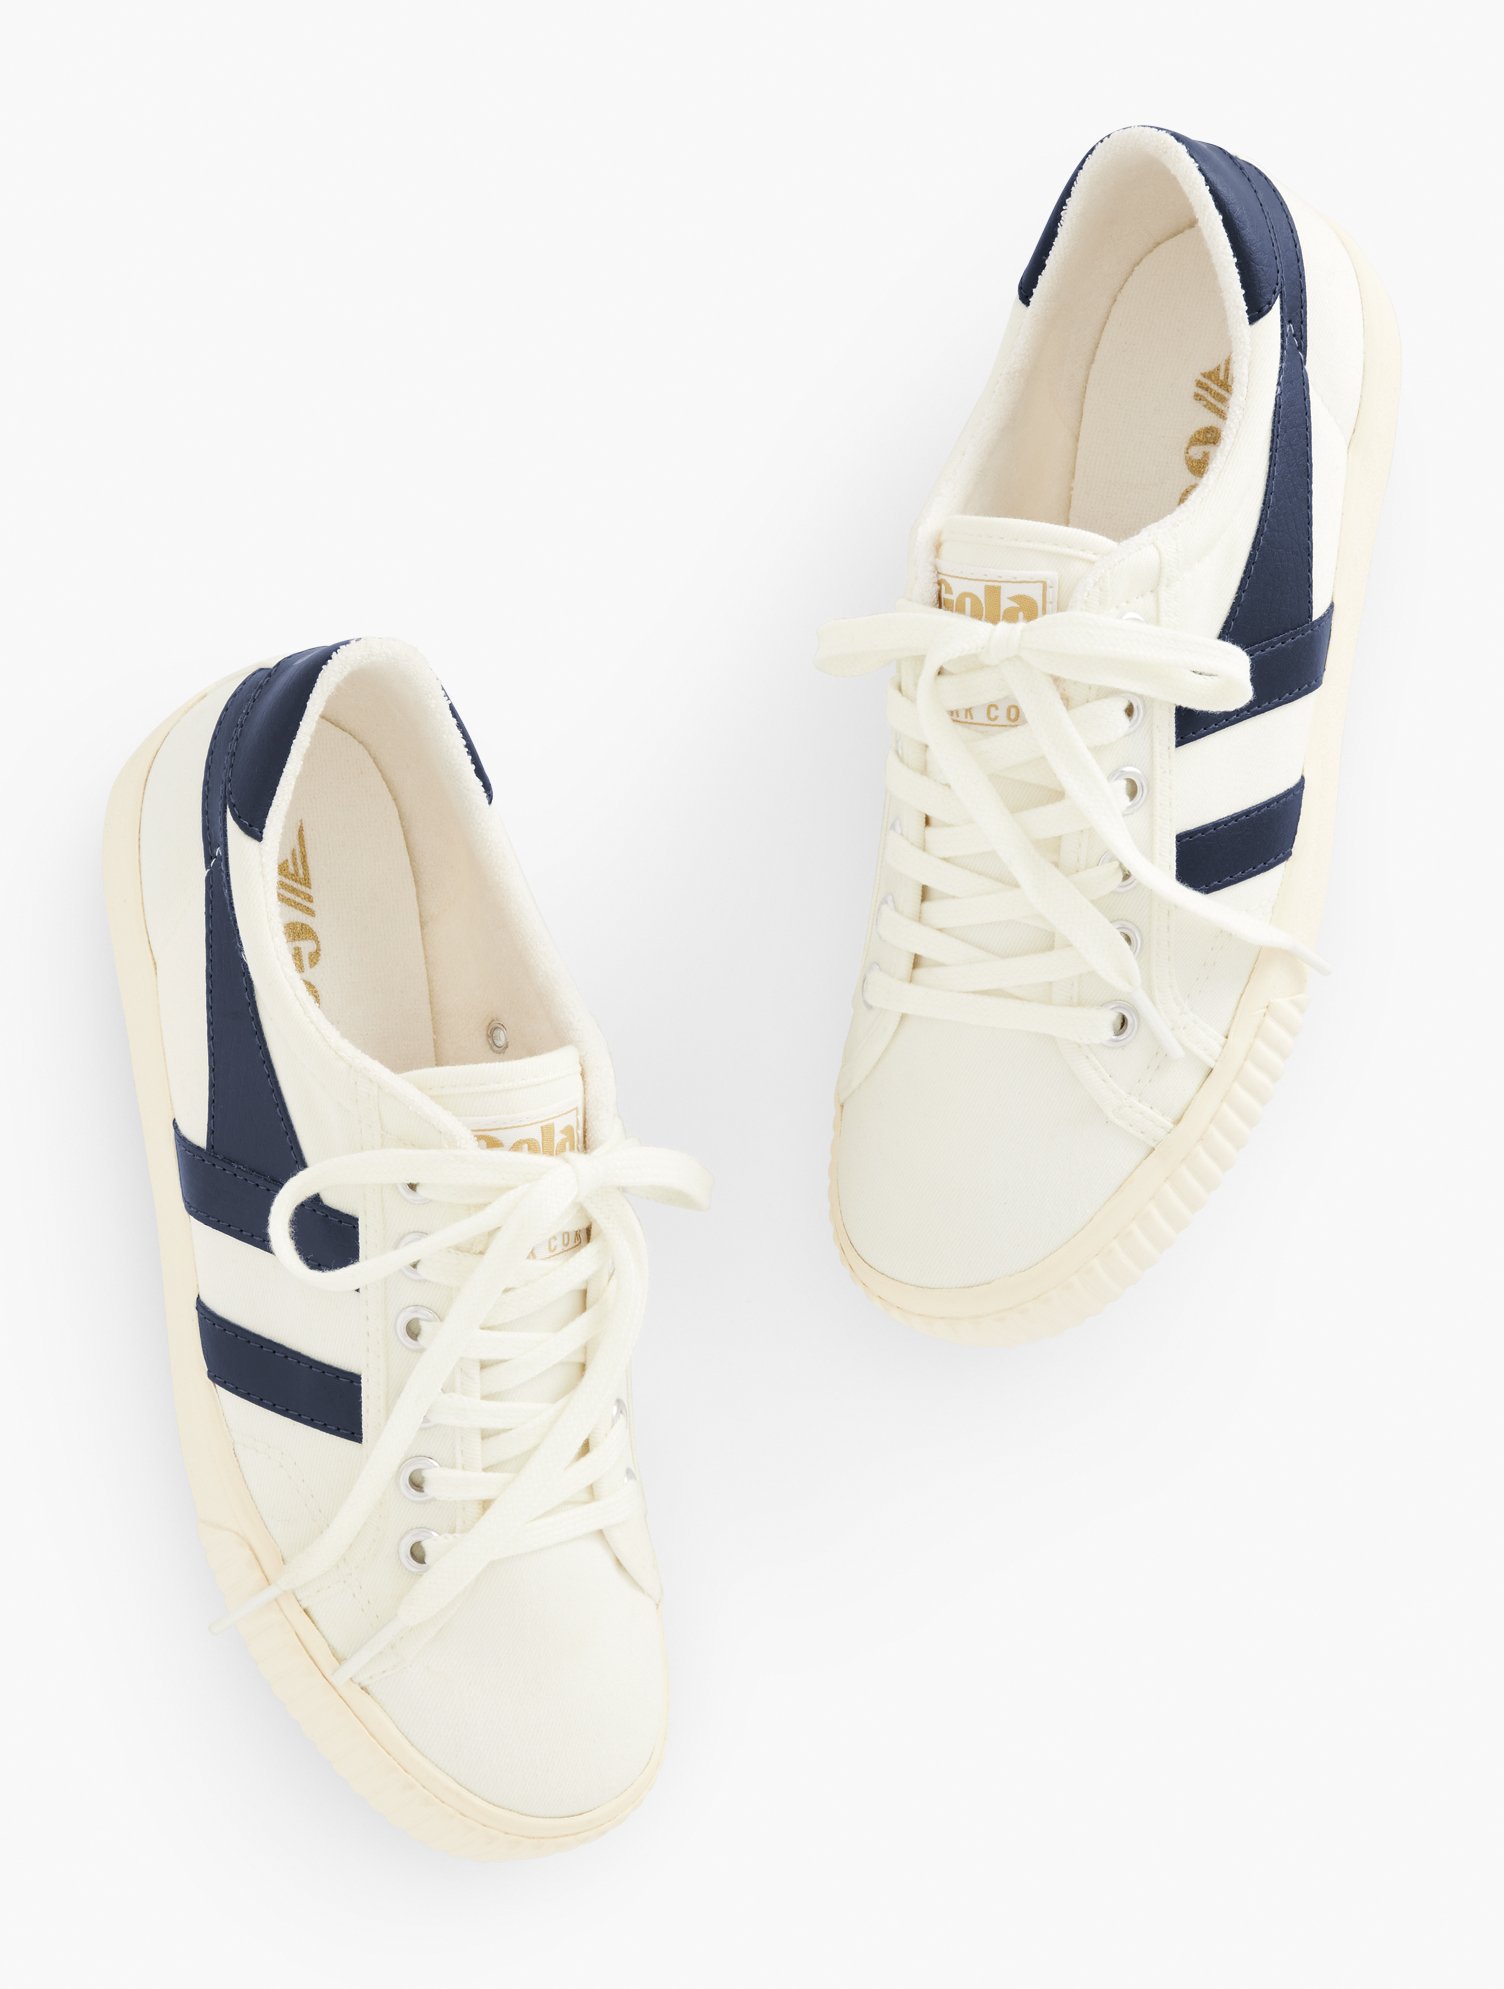 Talbots Golaâ® Mark Cox Tennis Sneakers - Off White/navy Blue - 8m - 100% Cotton  In Off White,navy Blue